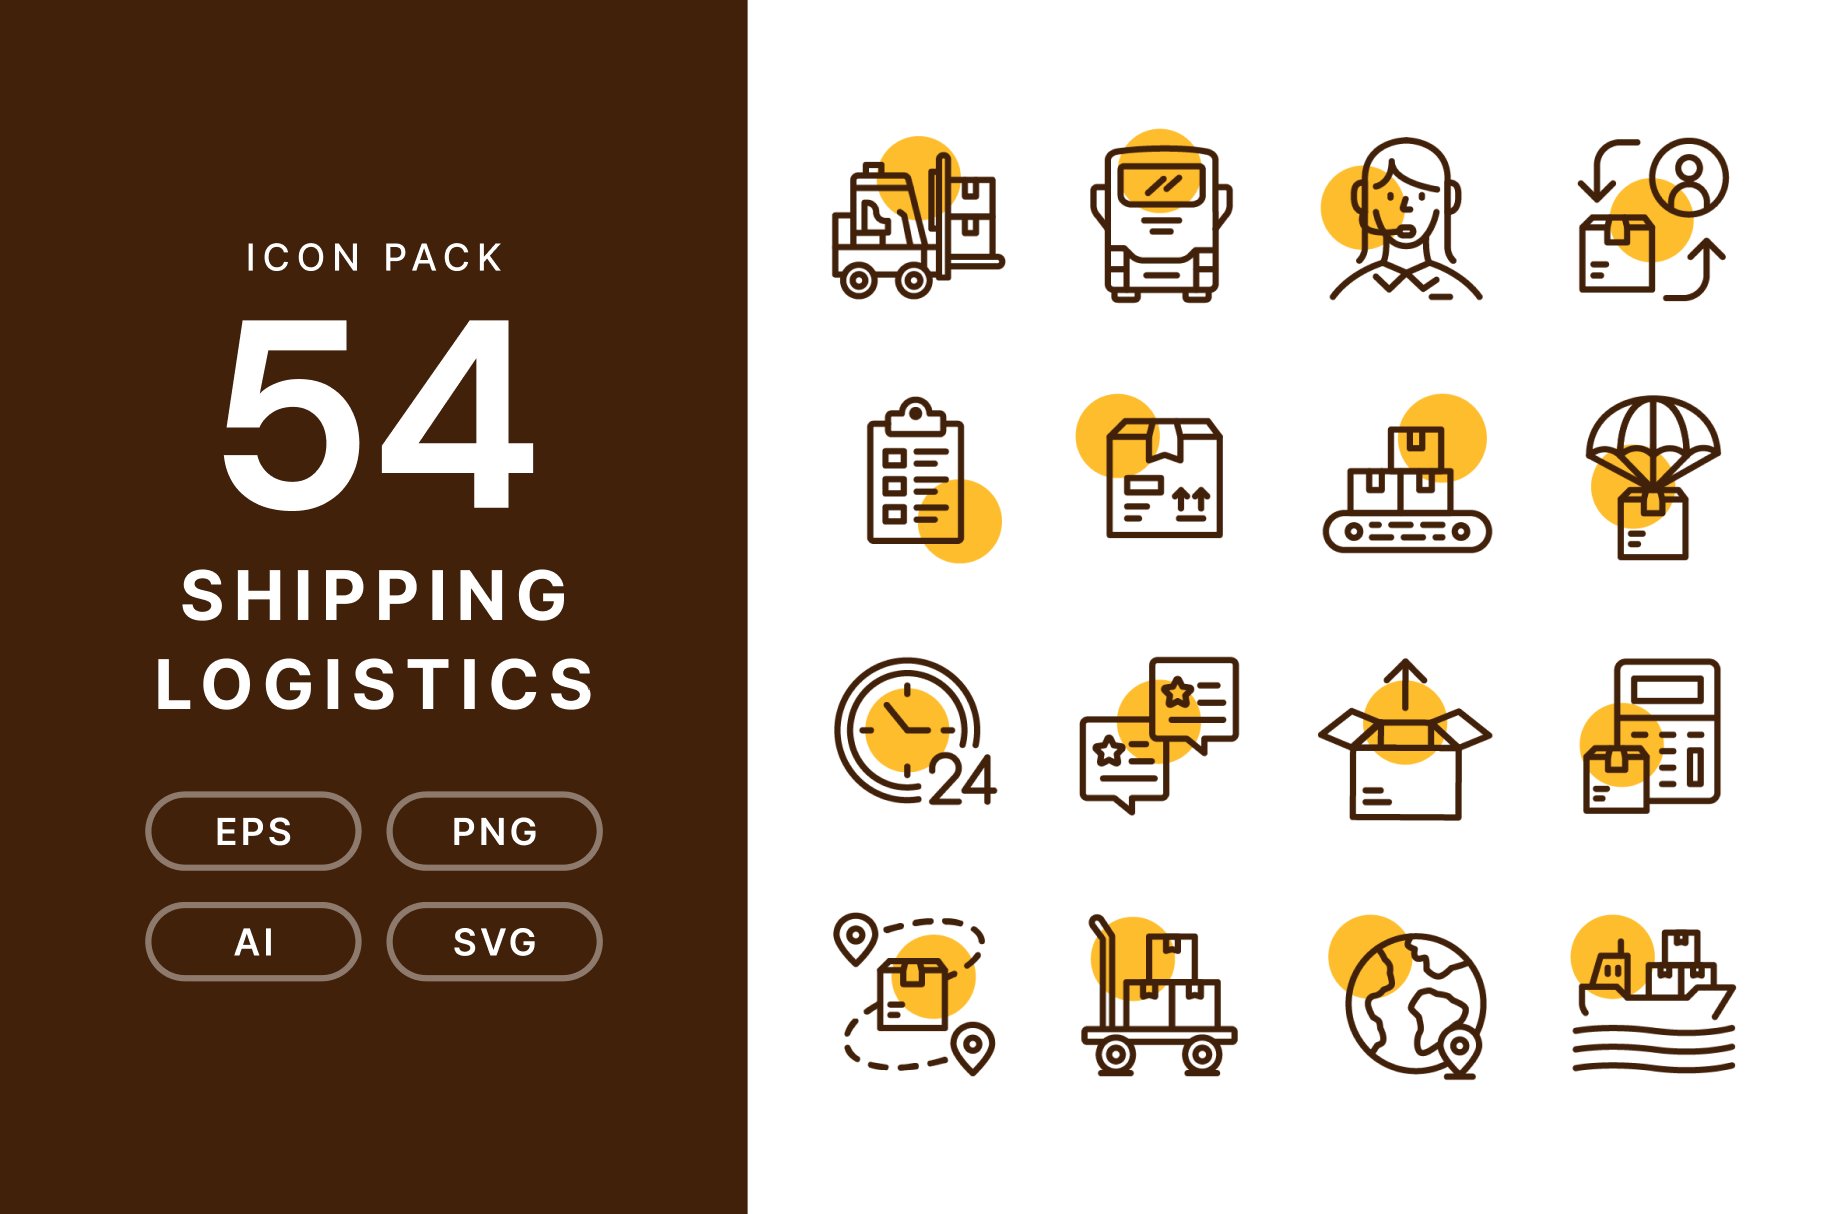 Shipping Logistics Icon Pack cover image.